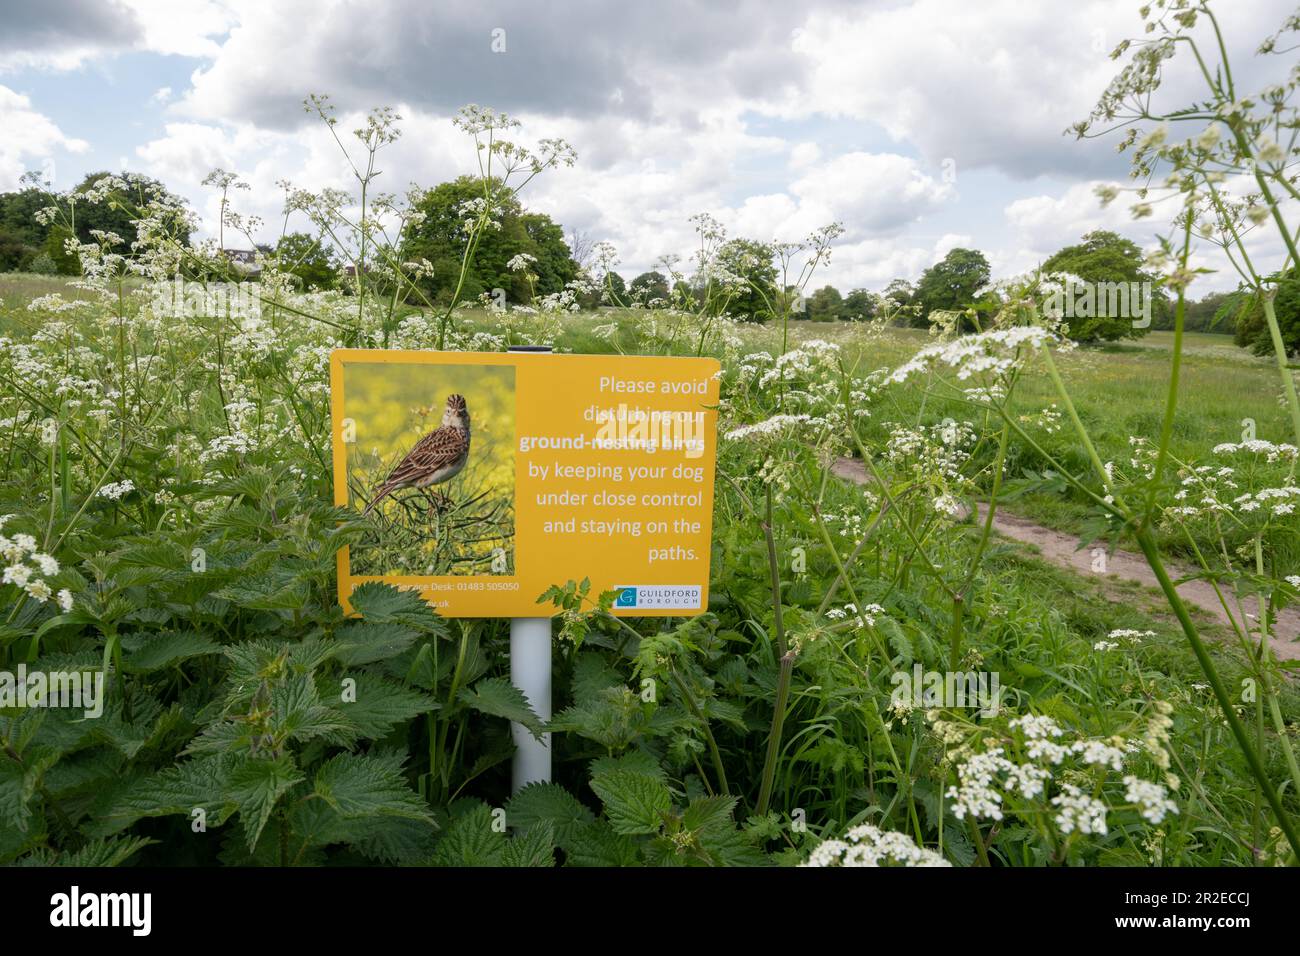 Sign in public grassland area - Please avoid disturbing ground-nesting birds by keeping dogs under close control and staying on paths, England, UK Stock Photo